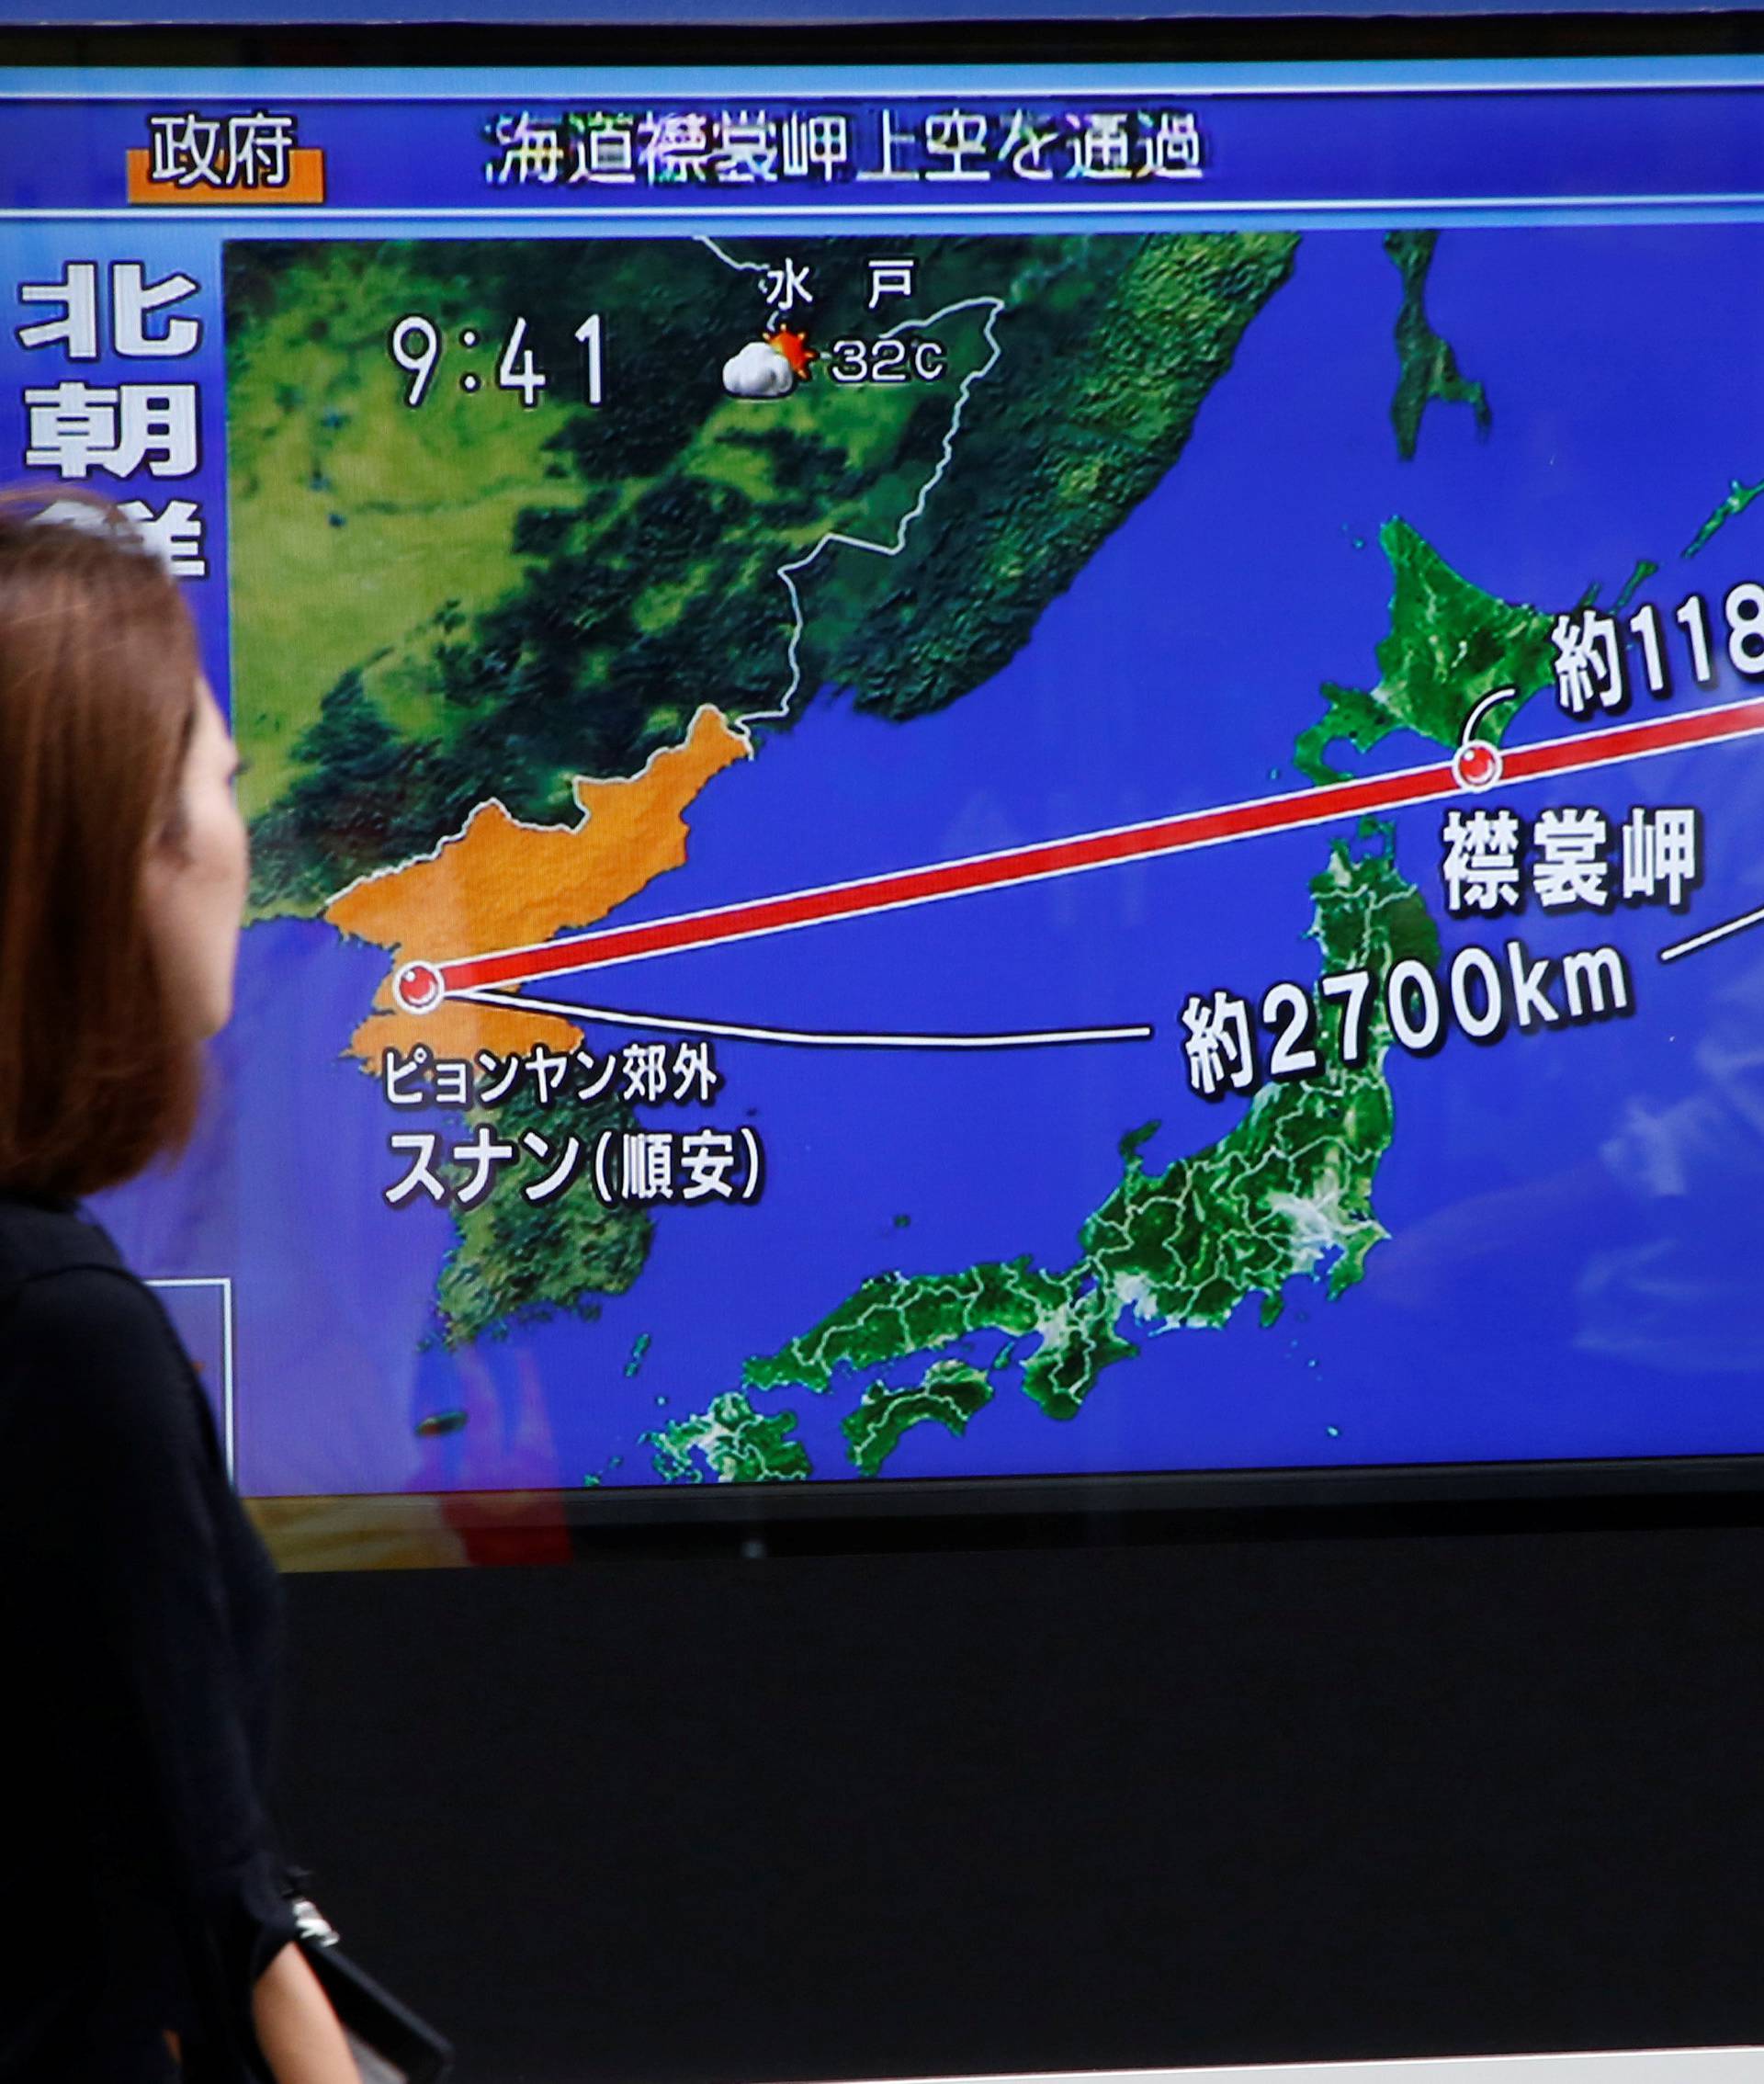 Pedestrians walk past a TV set showing news about North Korea's missile launch in Tokyo